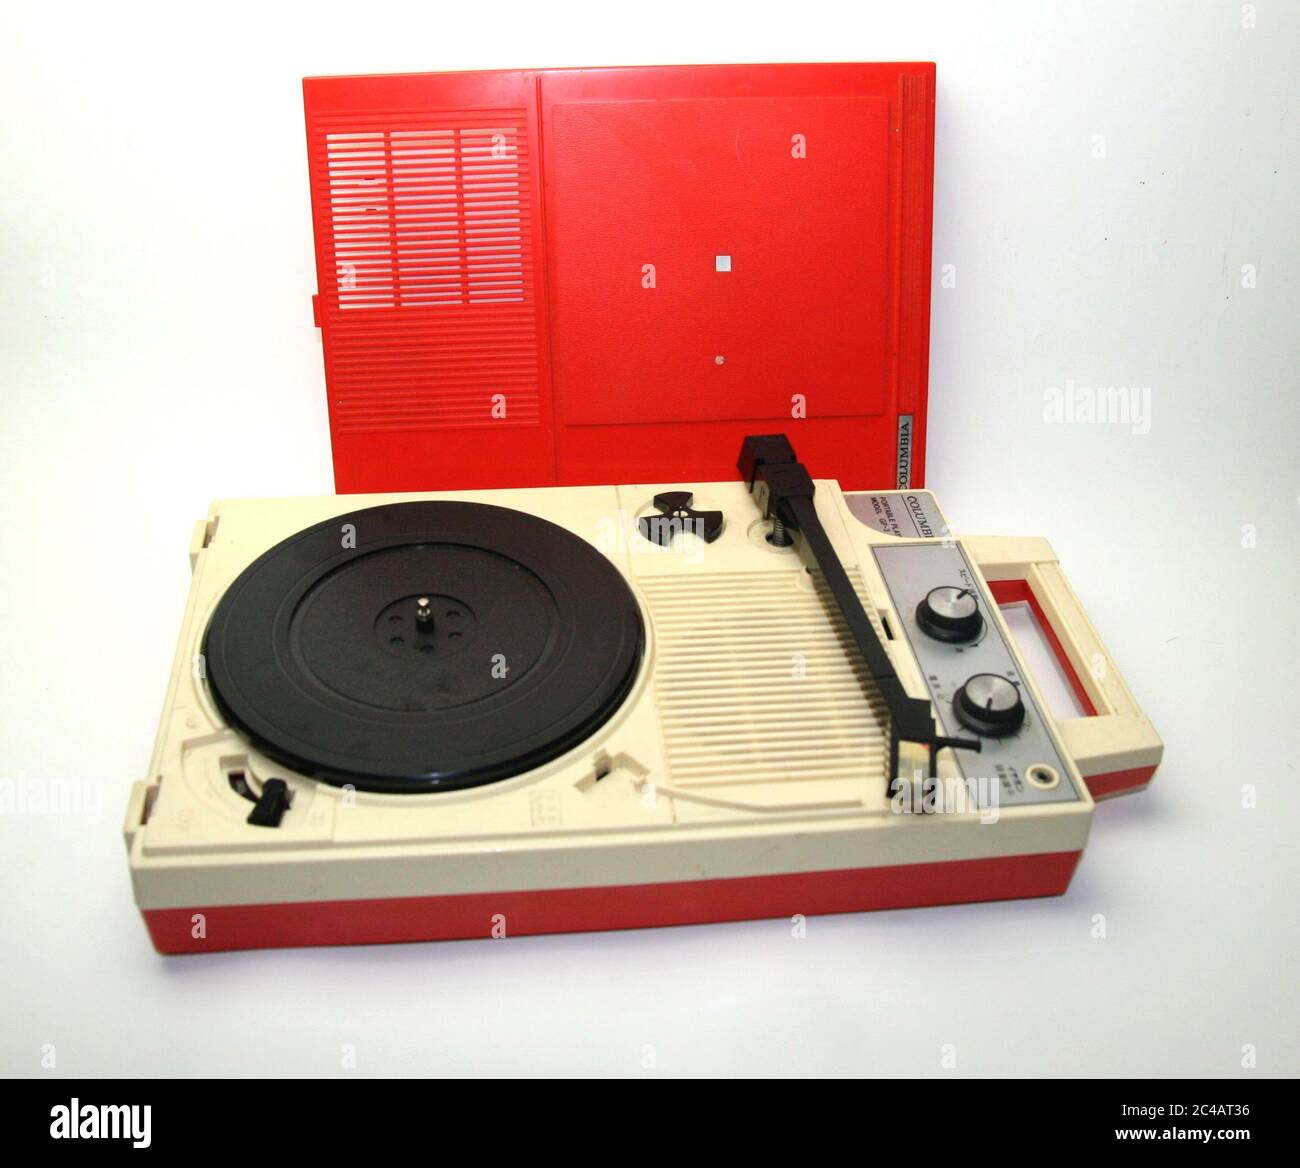 Tourne disque de marque Columbia ouvert fabrique en chine vers 1970 / Columbia open record player made in China around 1970 Stock Photo